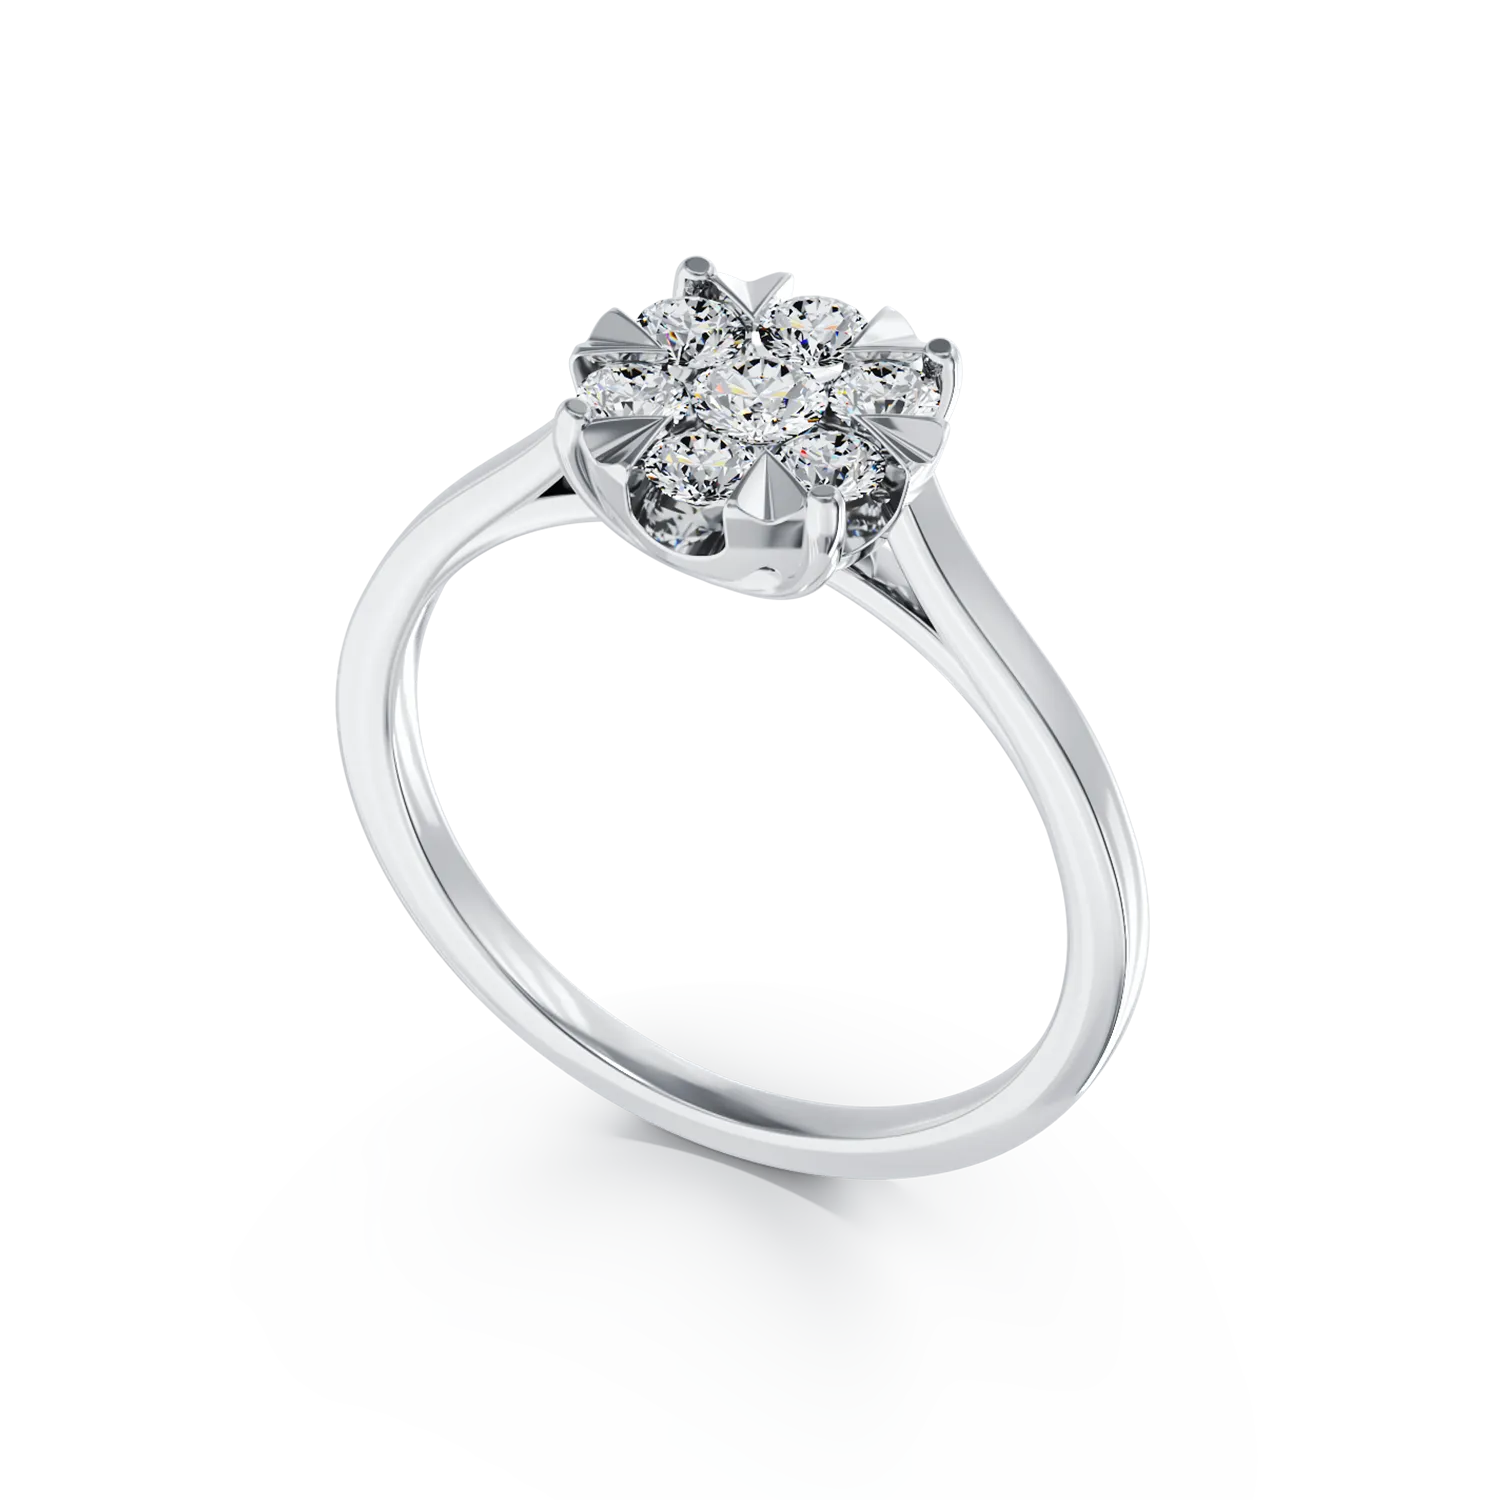 18K white gold engagement ring with 0.2ct diamonds